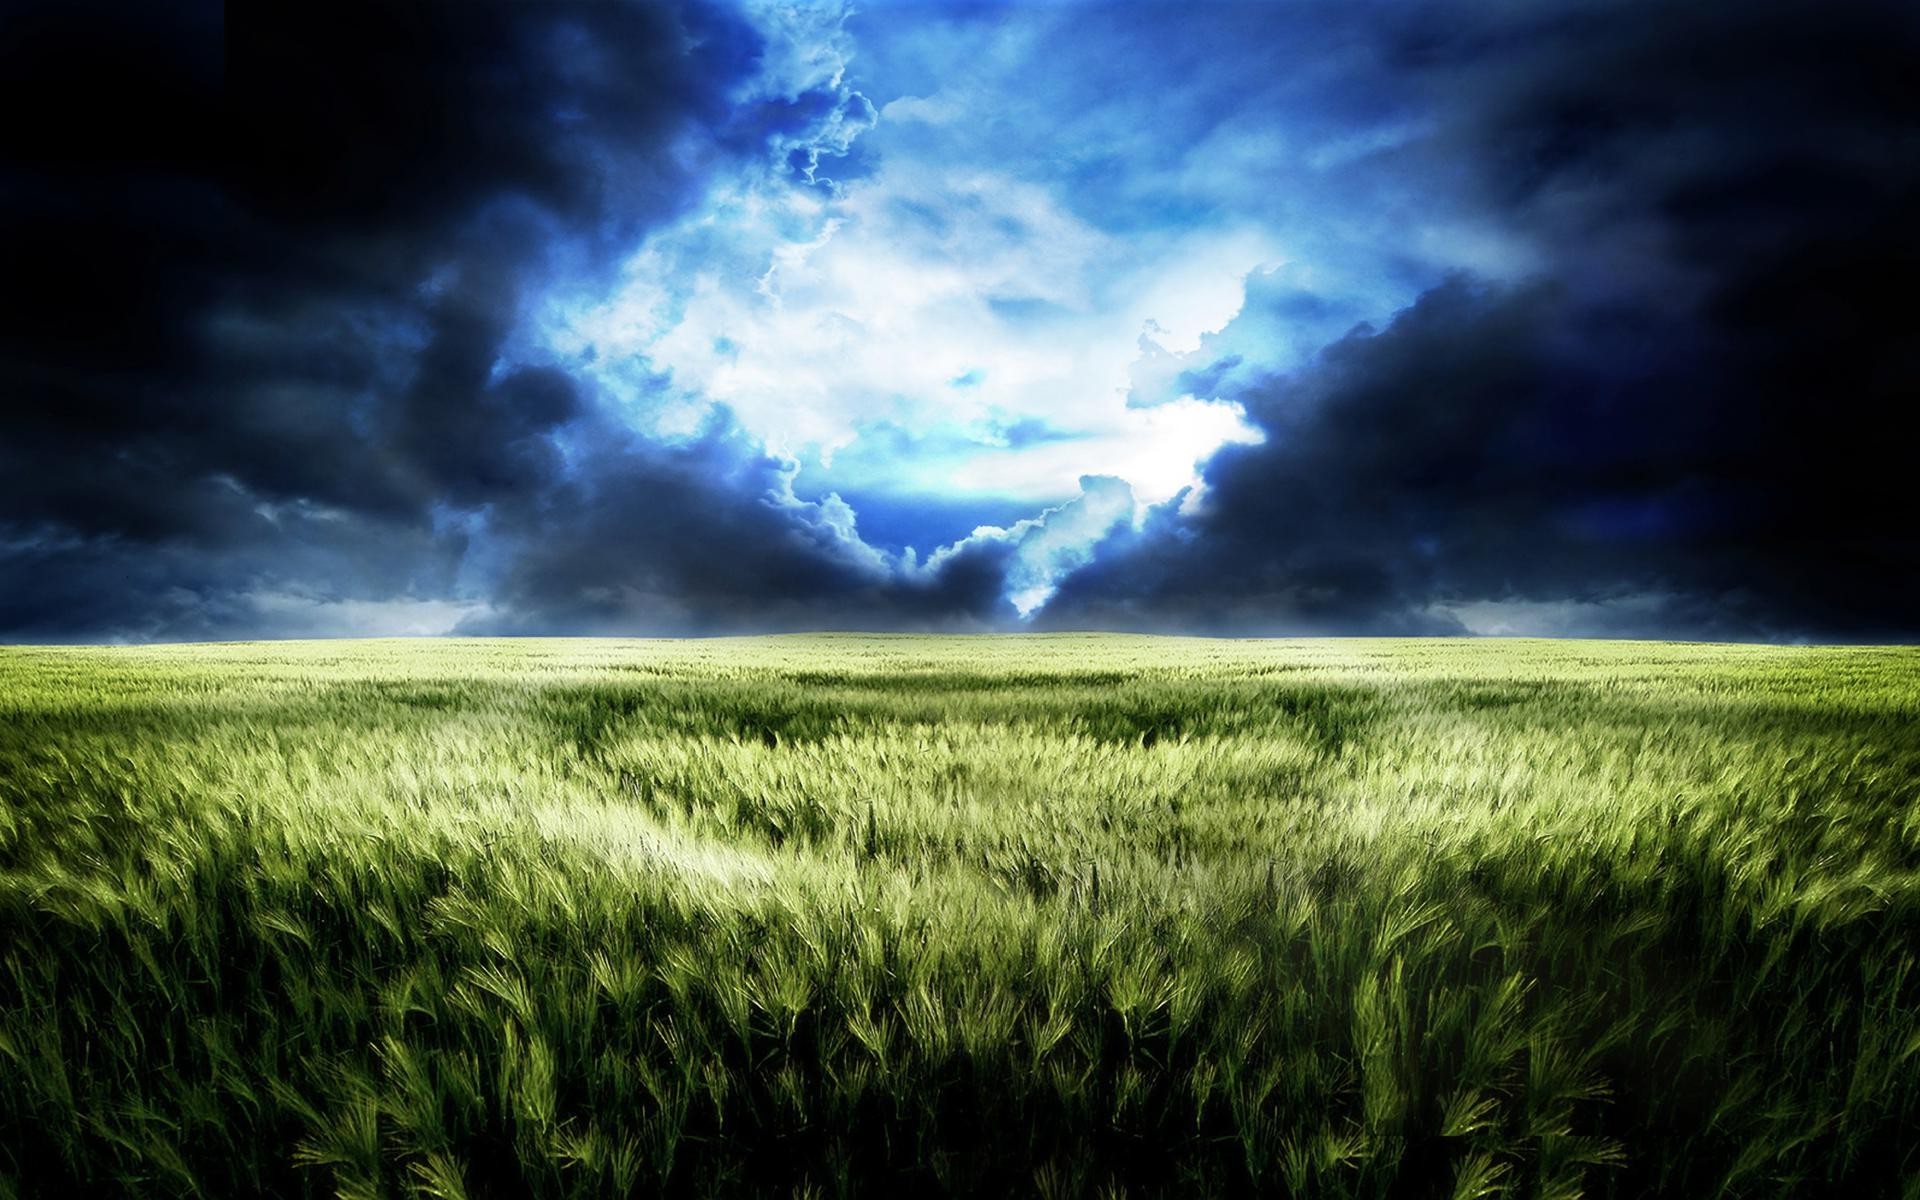 Storm clouds over wheat field wallpaper 6198 1920x1200